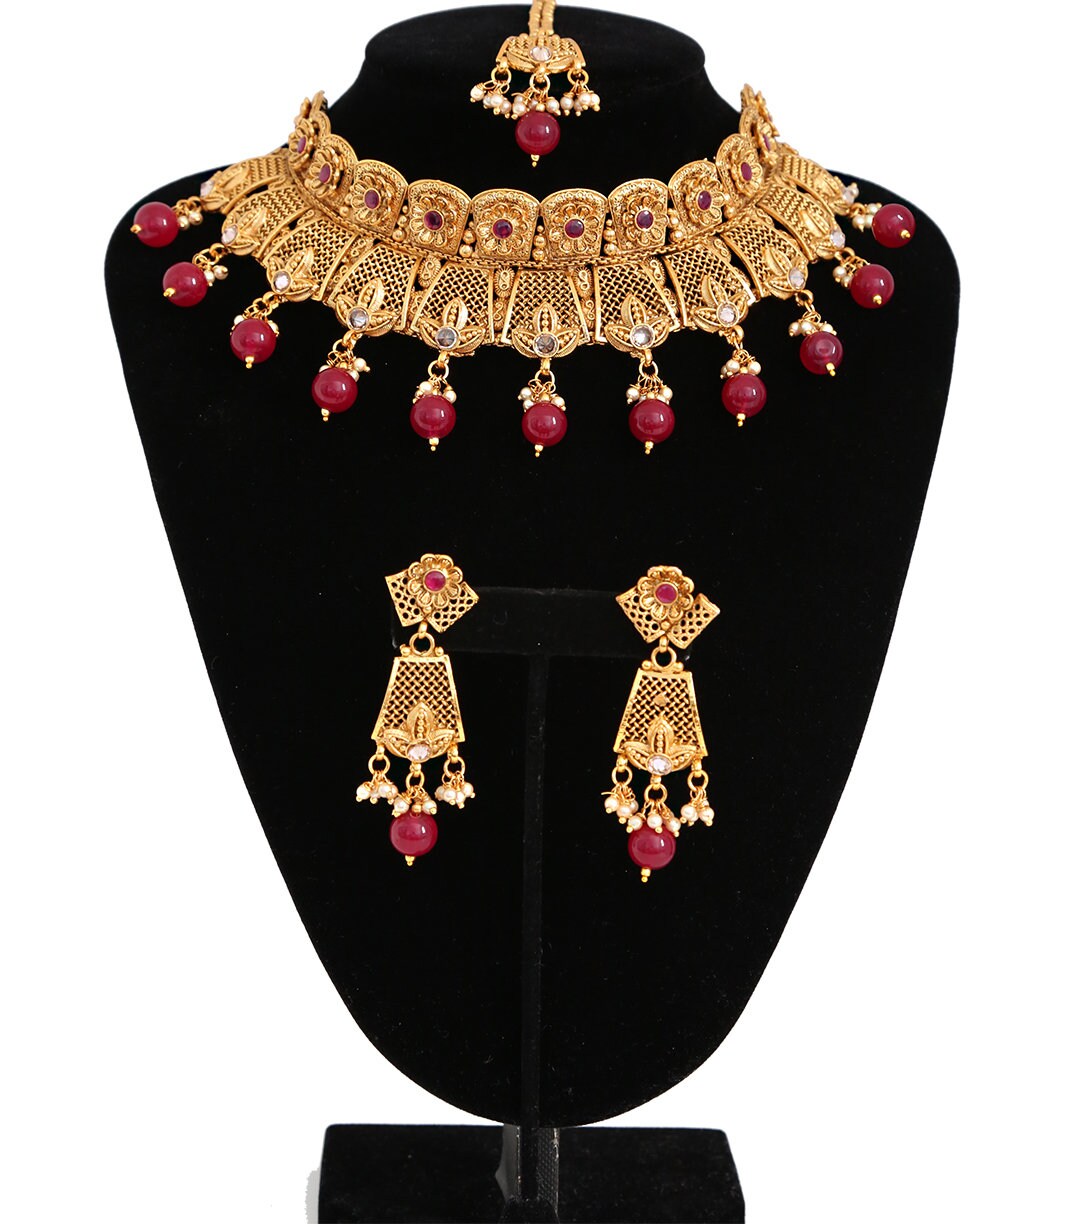 Indian Bridal Jewelry necklace with Matching earrings and Maang Tikka Kundan|Antique Gold Kundan Polki Wedding Jewelry|Ruby Round Stones